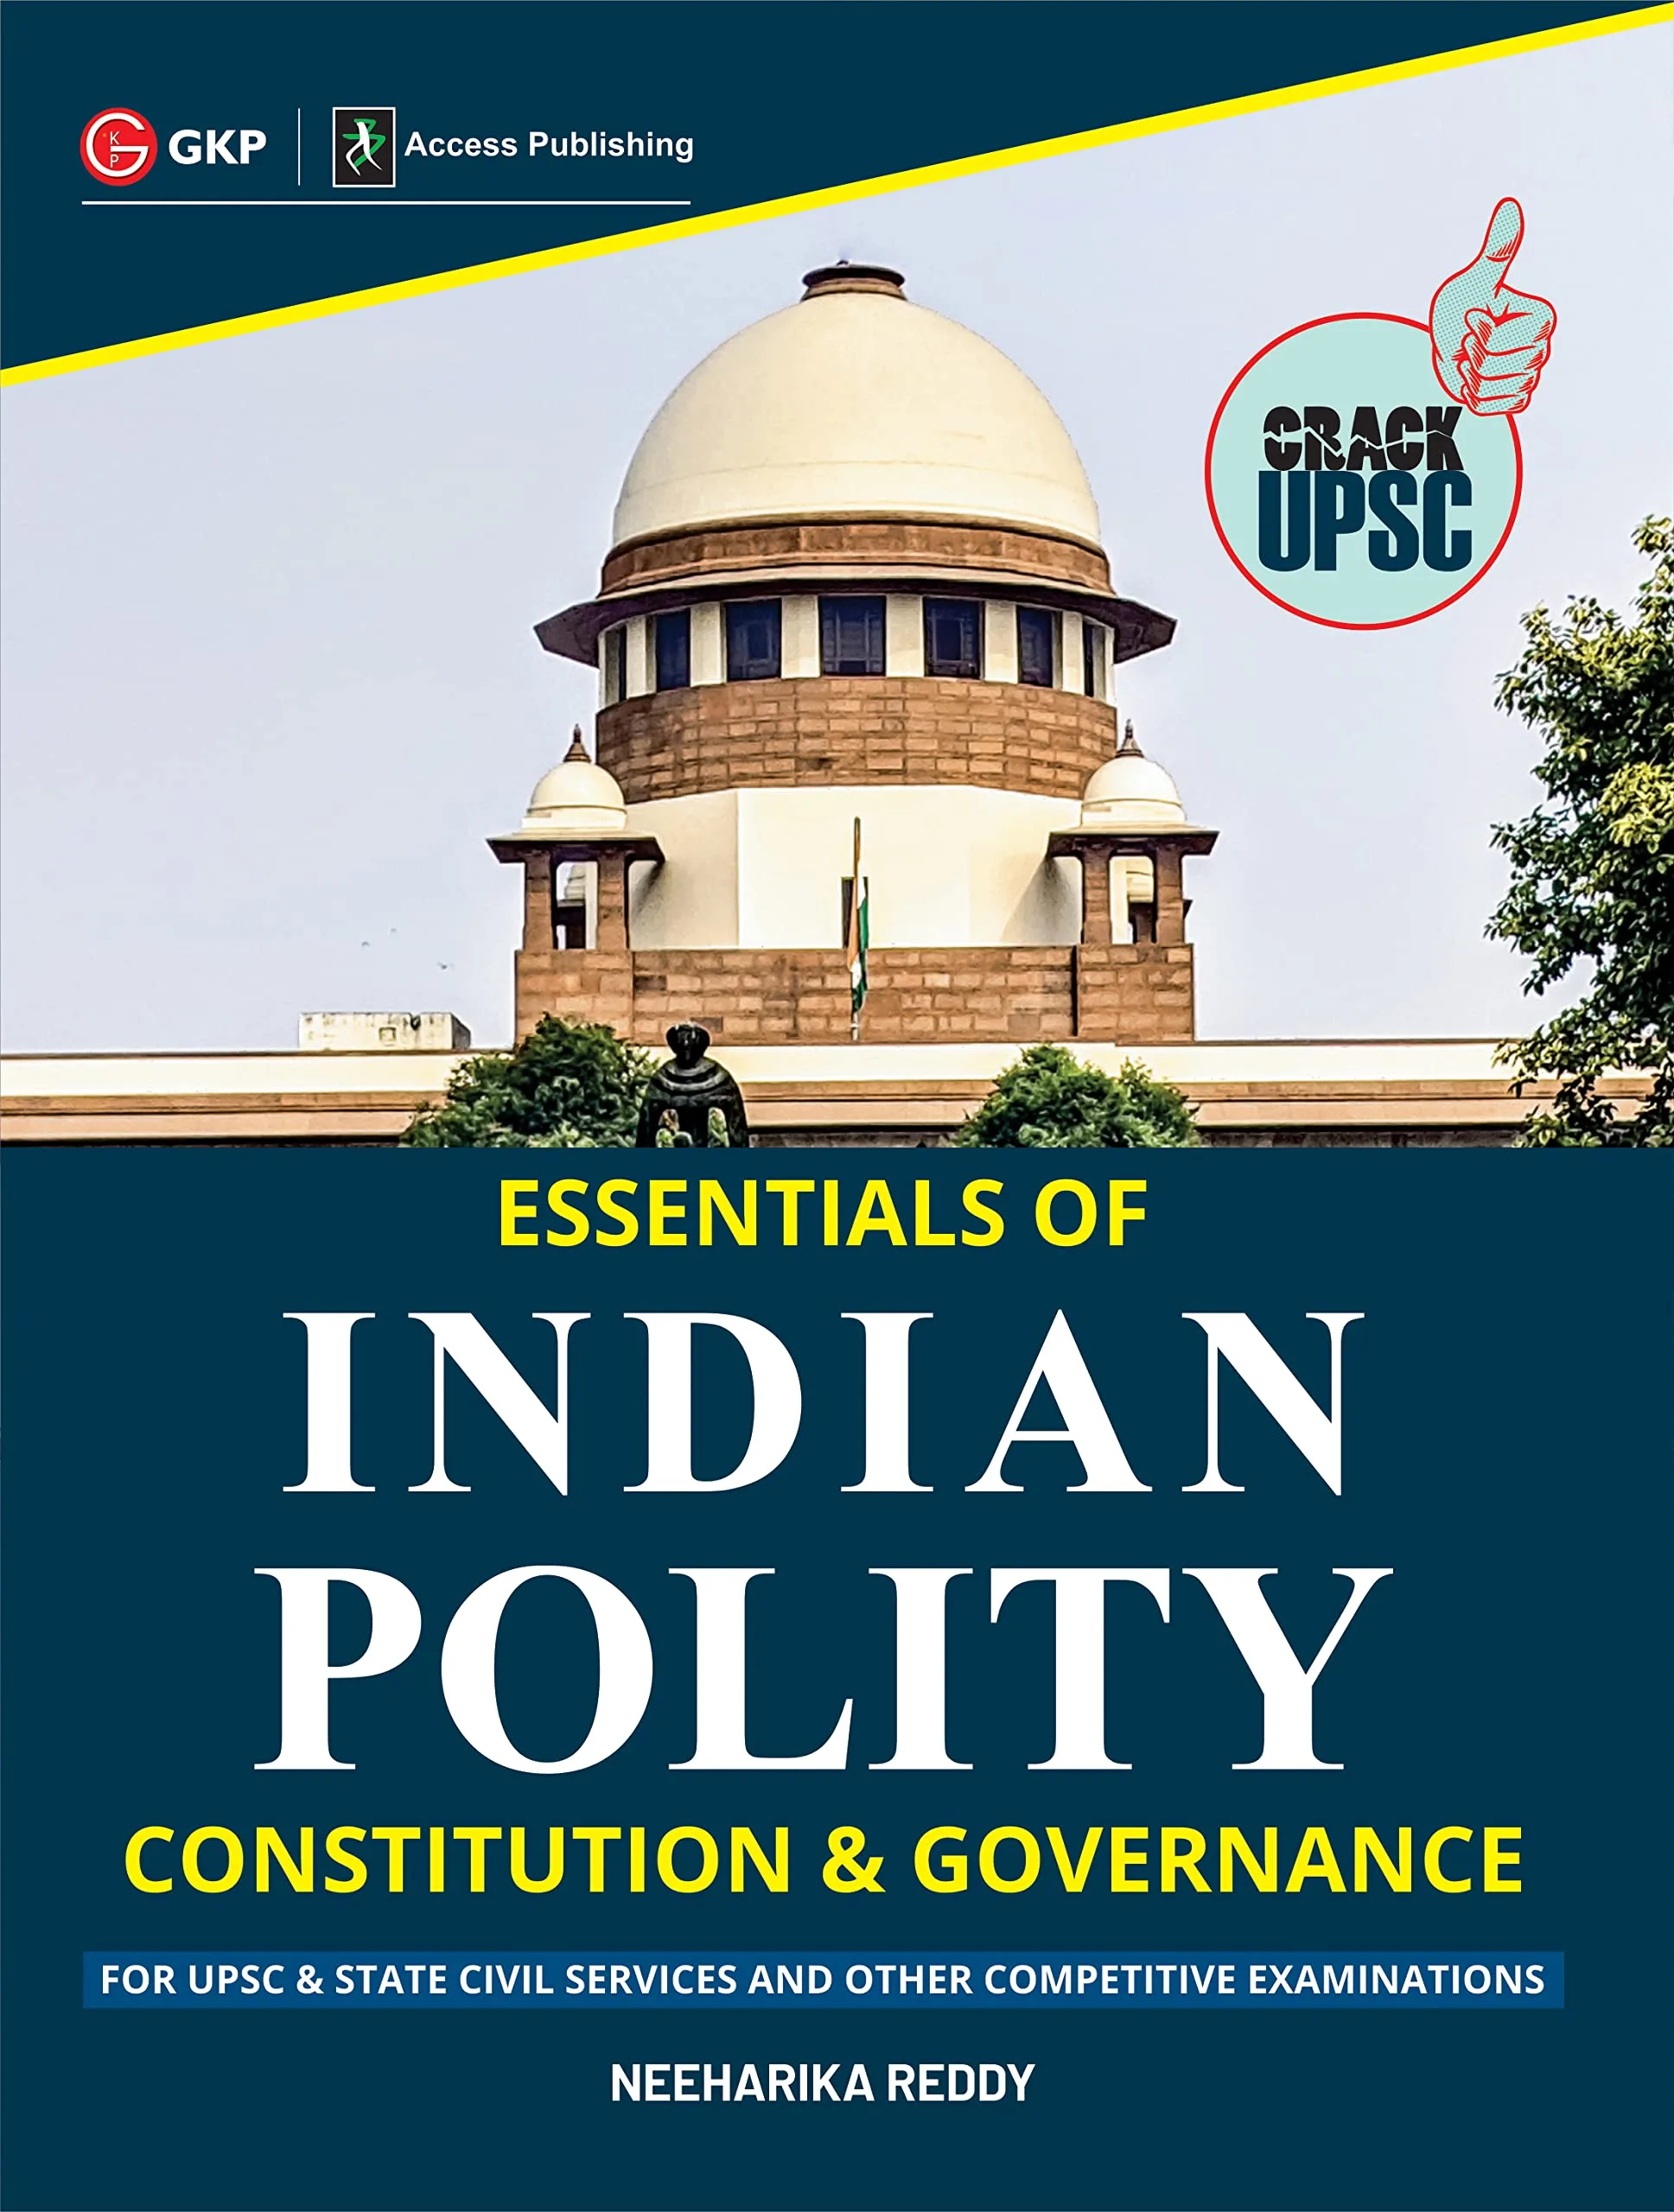 Essentials of Indian Polity Constitution & Governance by Neeharika Reddy